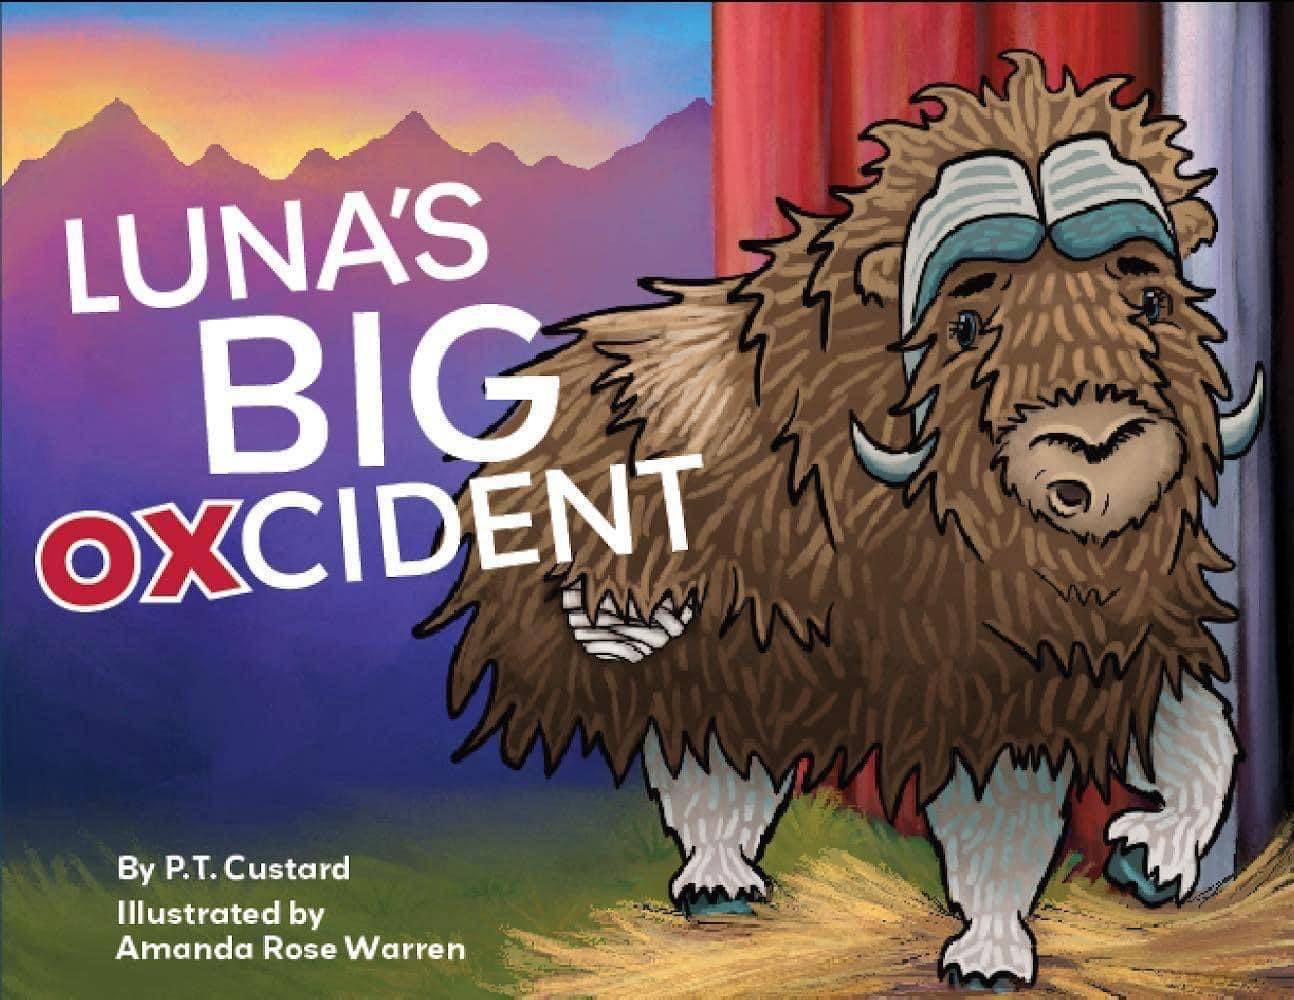 Author-signed copies of “Luna’s Big Oxcident,” a children’s book based on a real Musk Ox Farm in Palmer, will be available in exchange for donations to the musk ox farm during first Friday. (Courtesy Image / P.T. Custard)